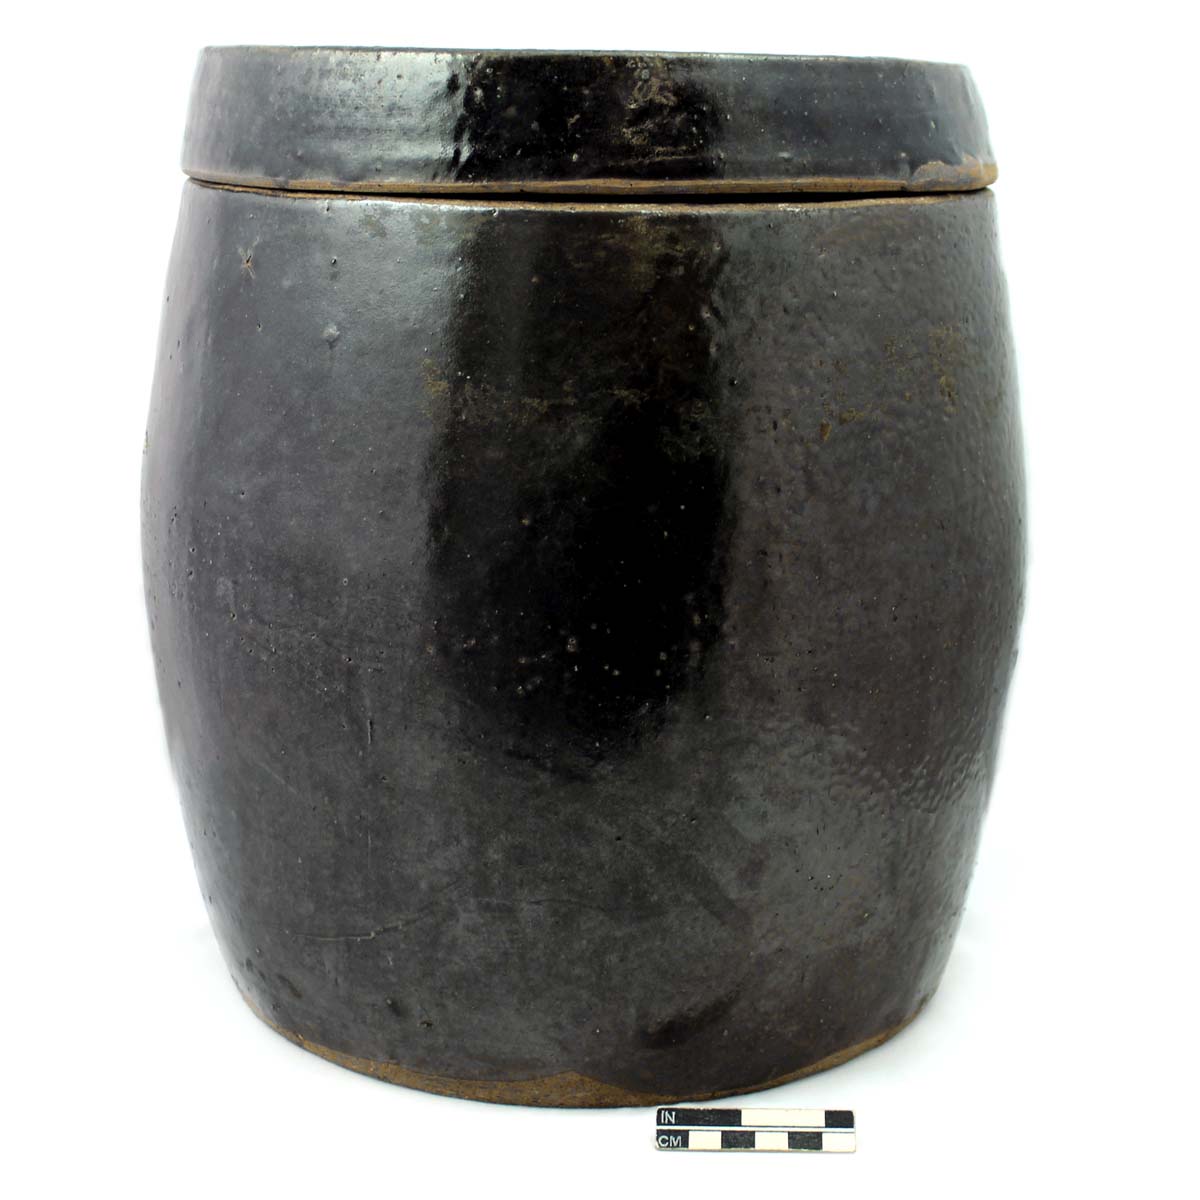 Barrel jar and lid, Chinese brown-glazed stoneware. 